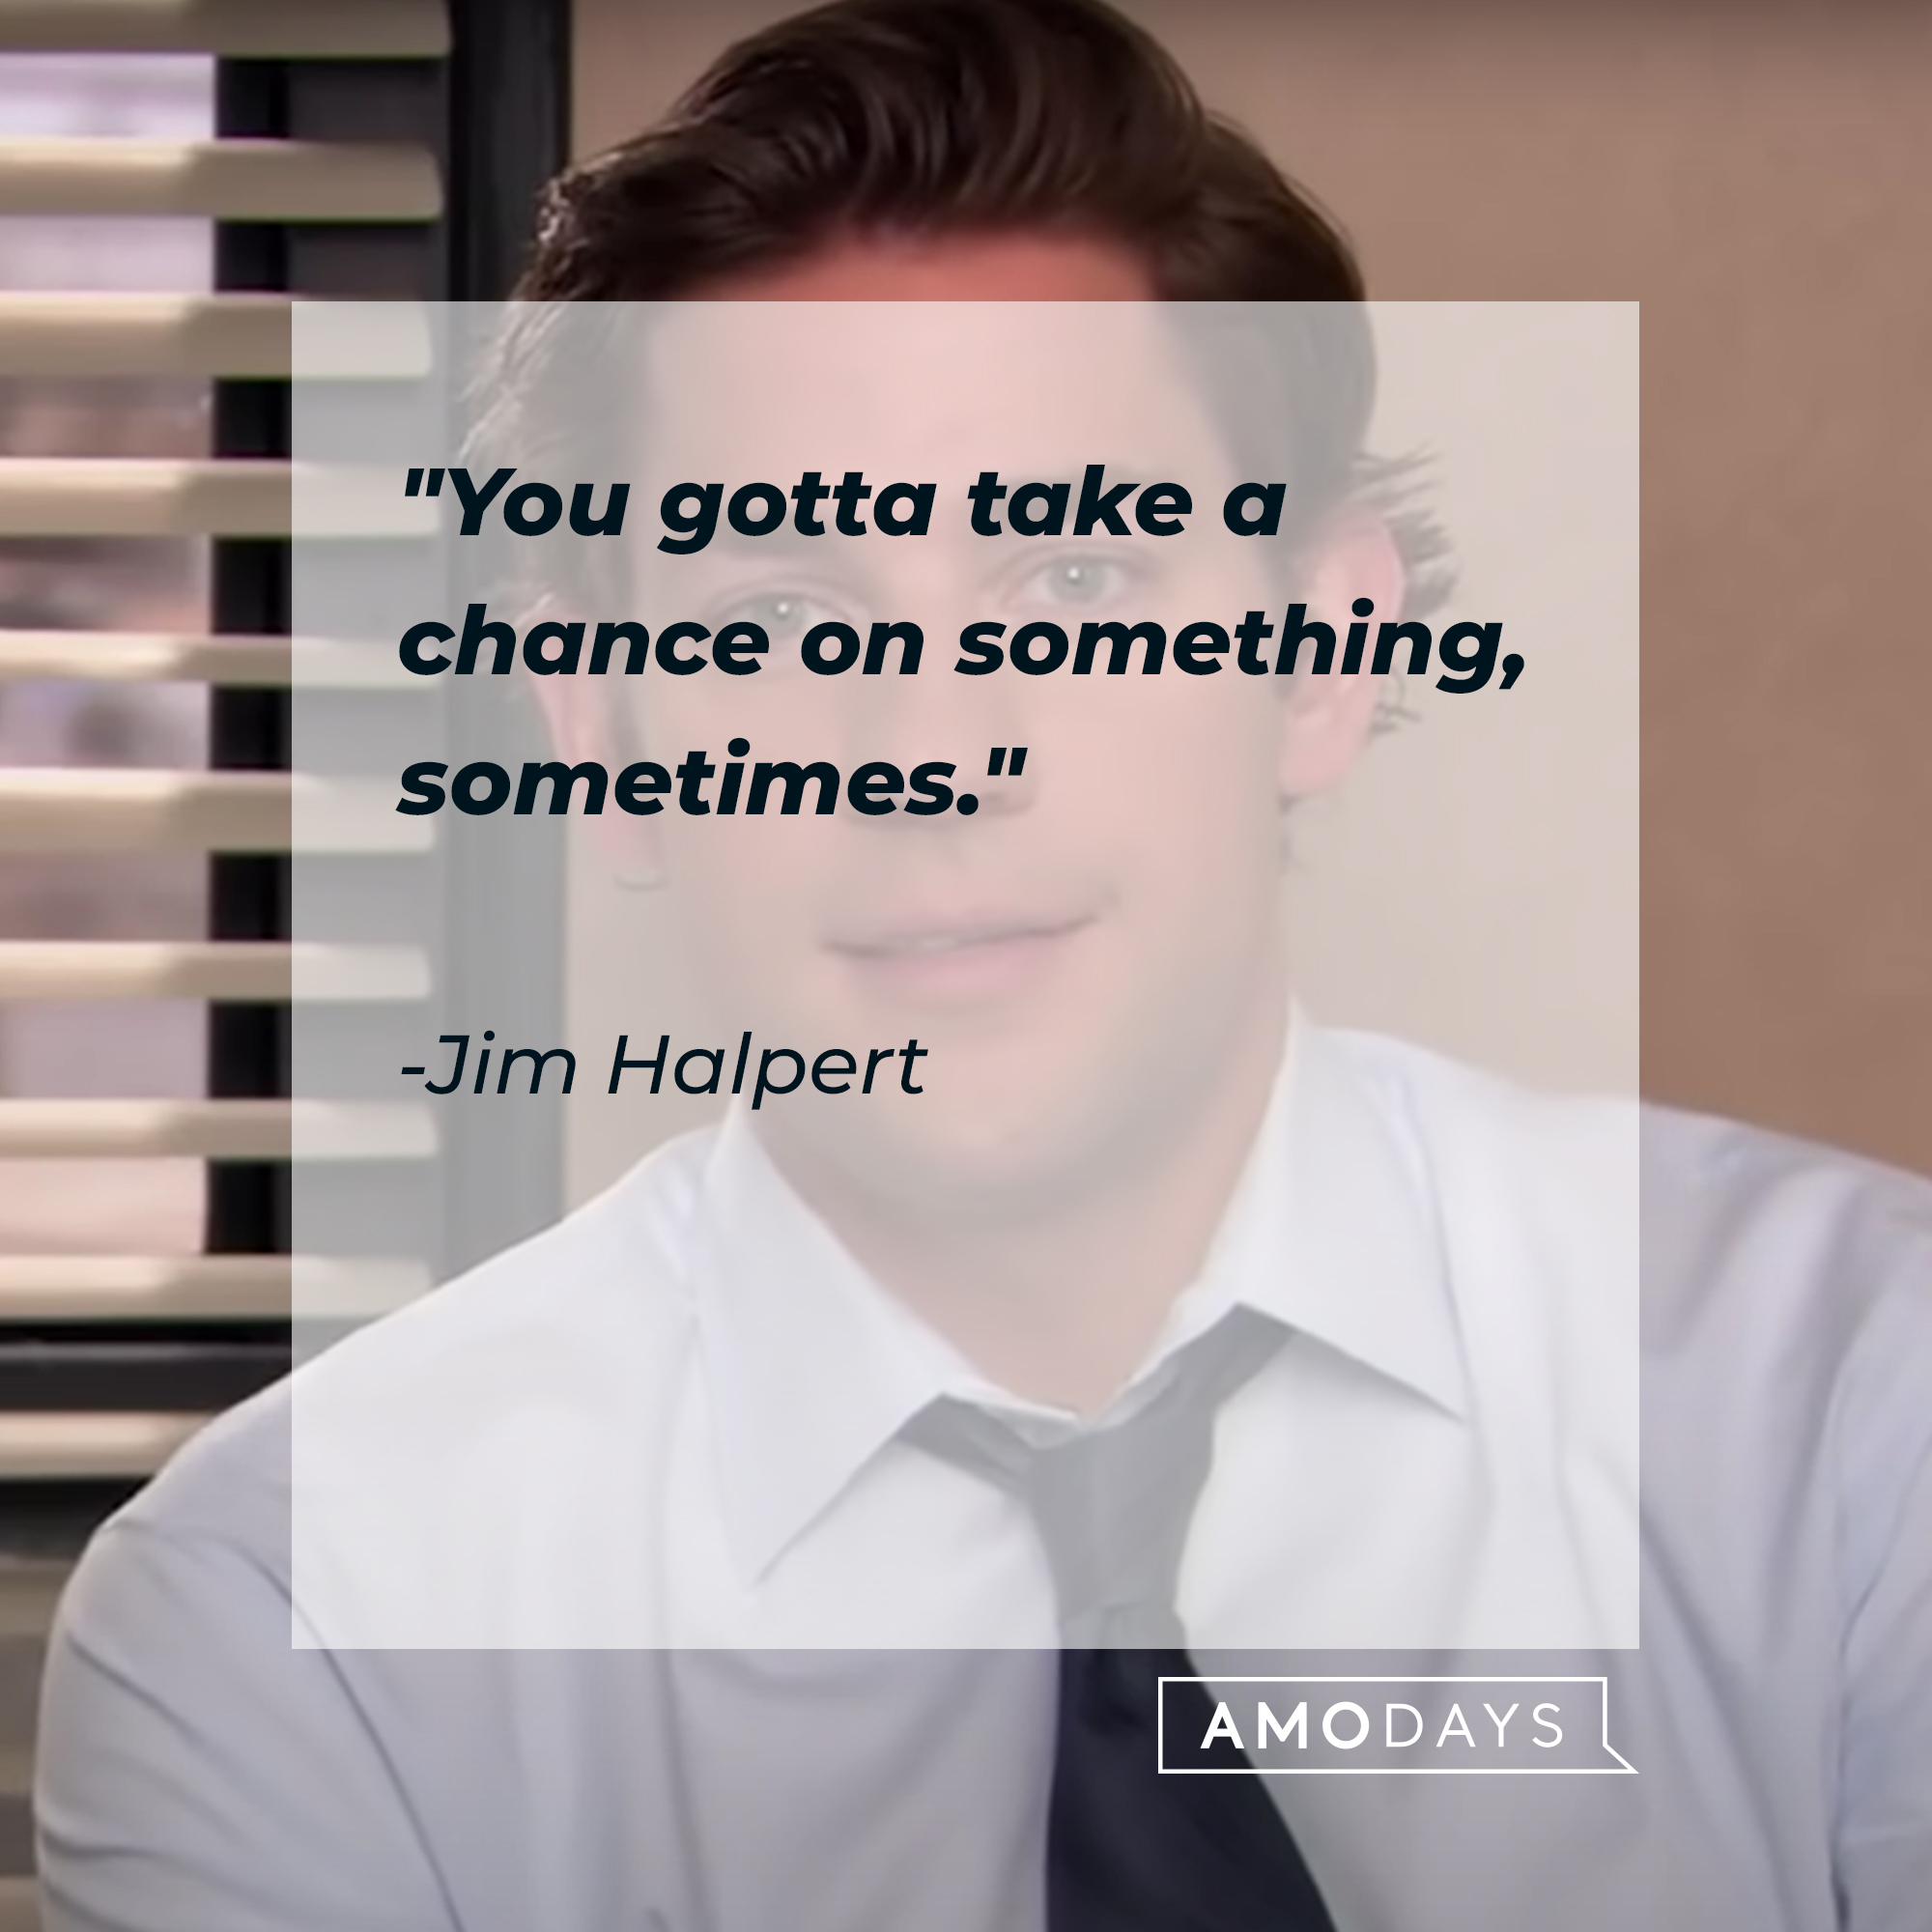 Jim Halpert's quote: "You gotta take a chance on something, sometimes." | Source: YouTube/TheOffice